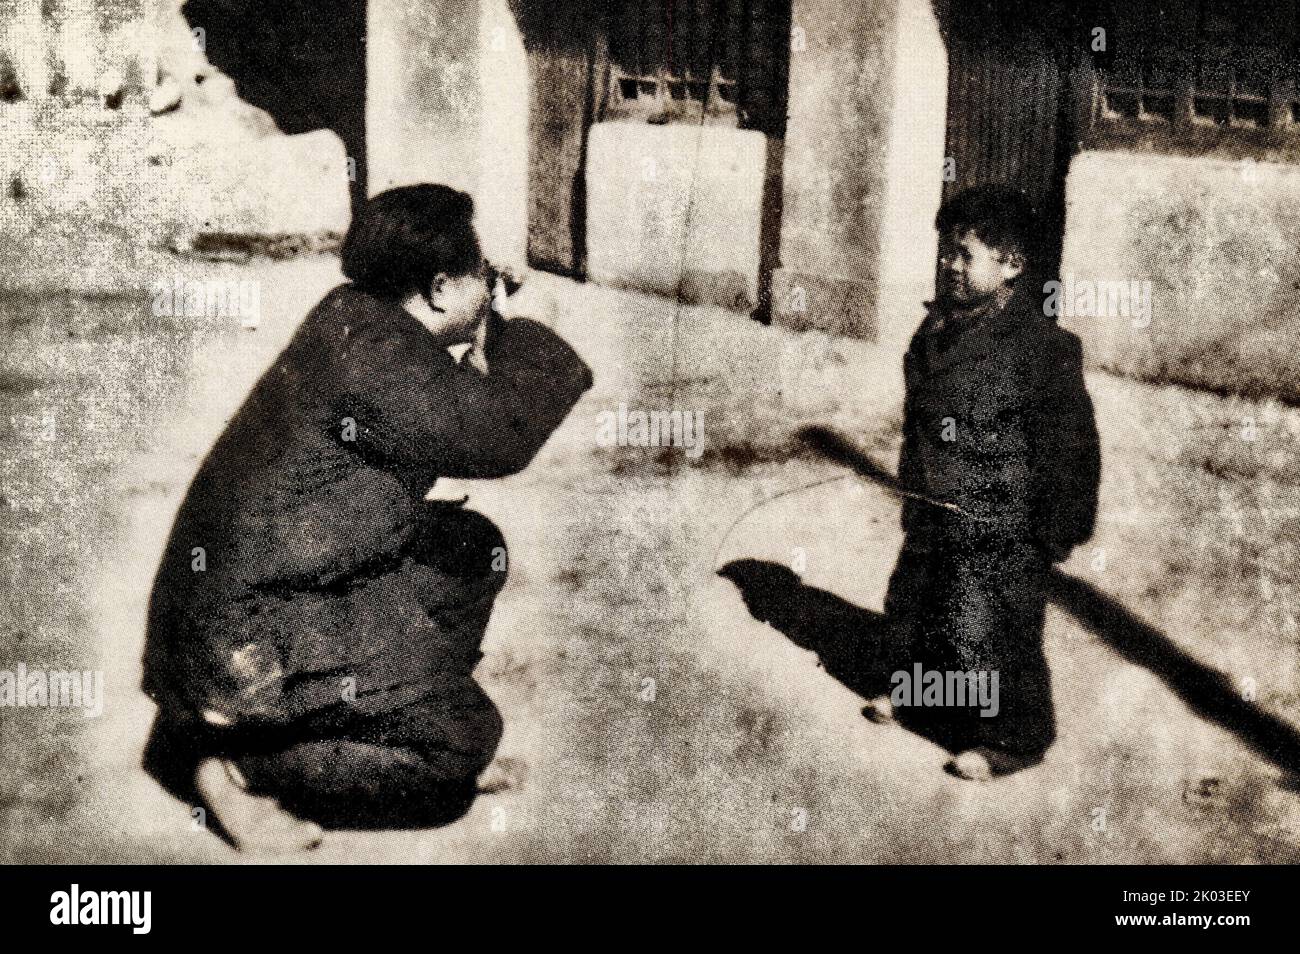 Ren Bishi has a wide range of hobbies. In his spare time, he likes photography and hunting. Ren Bishi was a military and political leader in the early Chinese Communist Party. In the early 1930s, Stock Photo